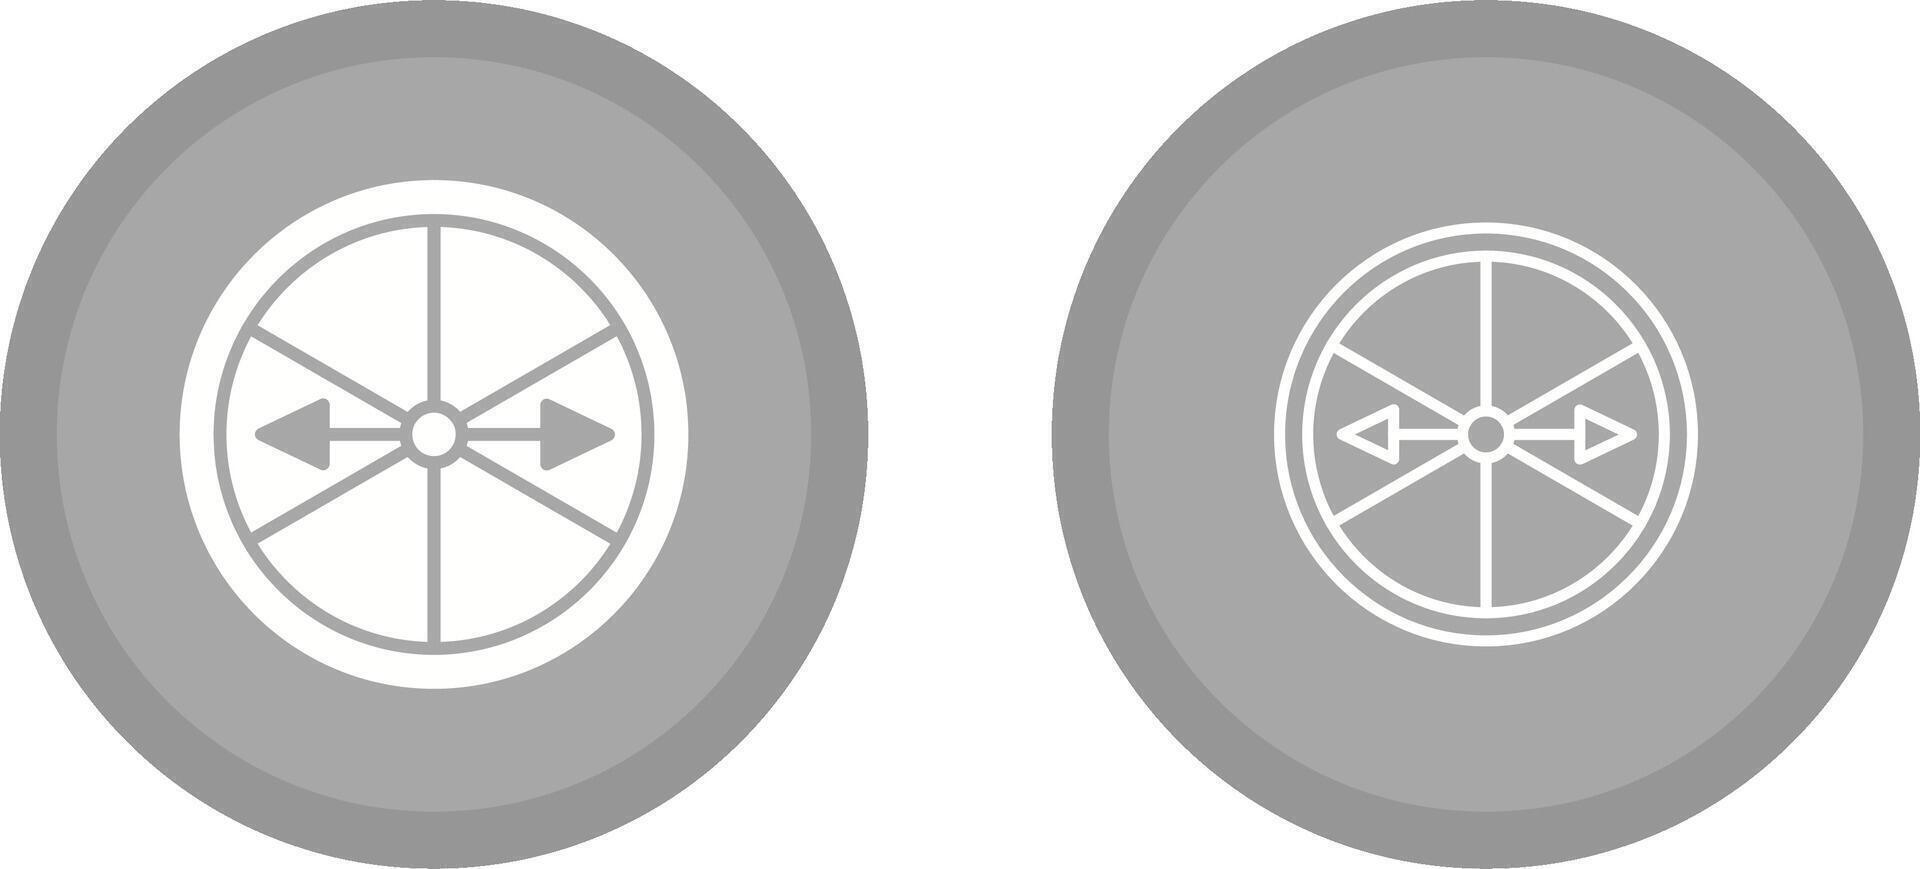 Roulette with Arrow Vector Icon